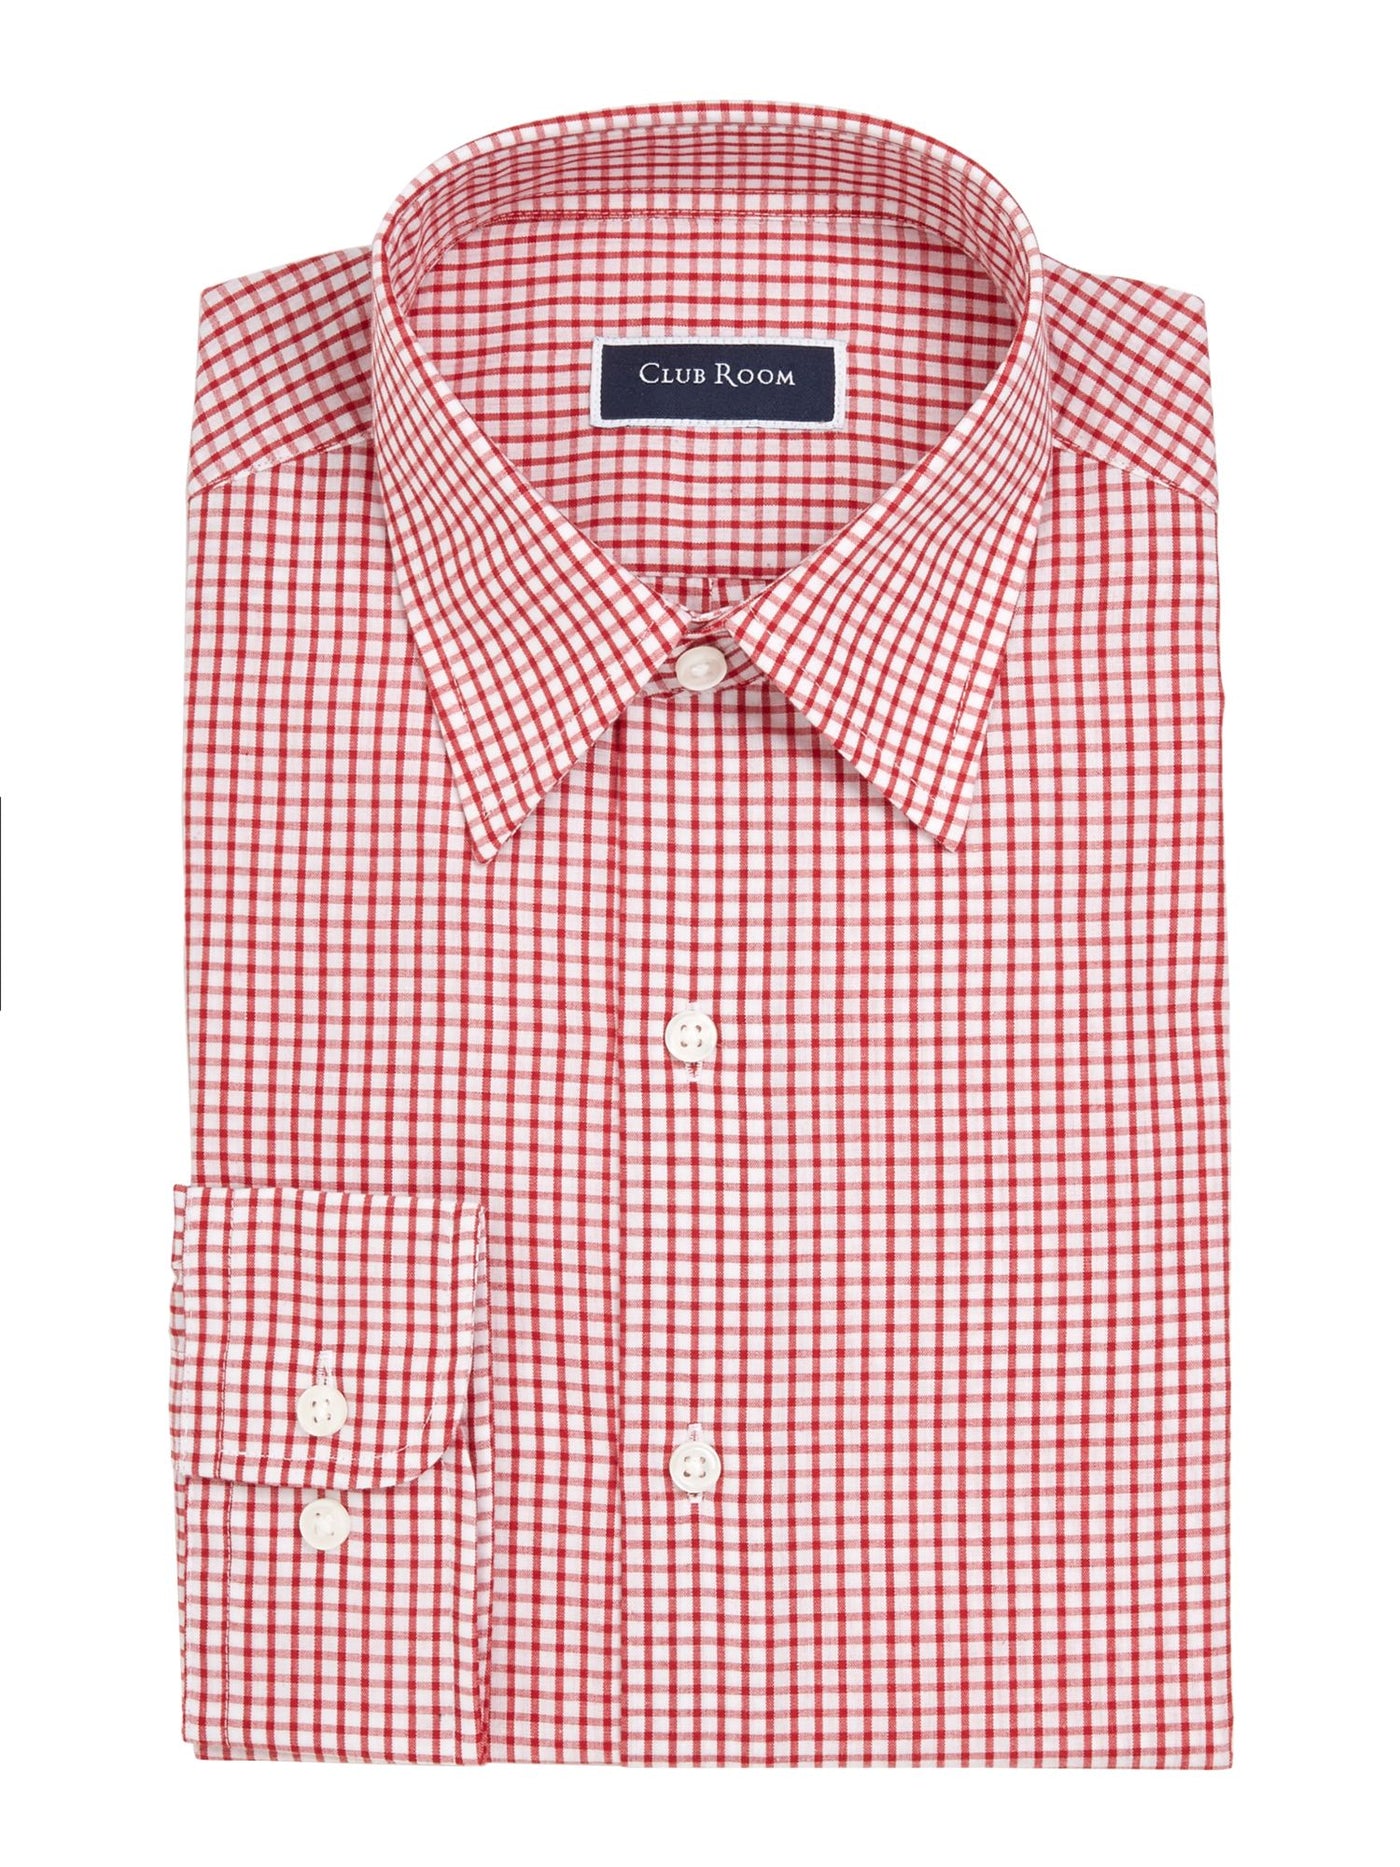 CLUBROOM Mens Red Check Point Collar Classic Fit Button Down Shirt 15.5-32/33